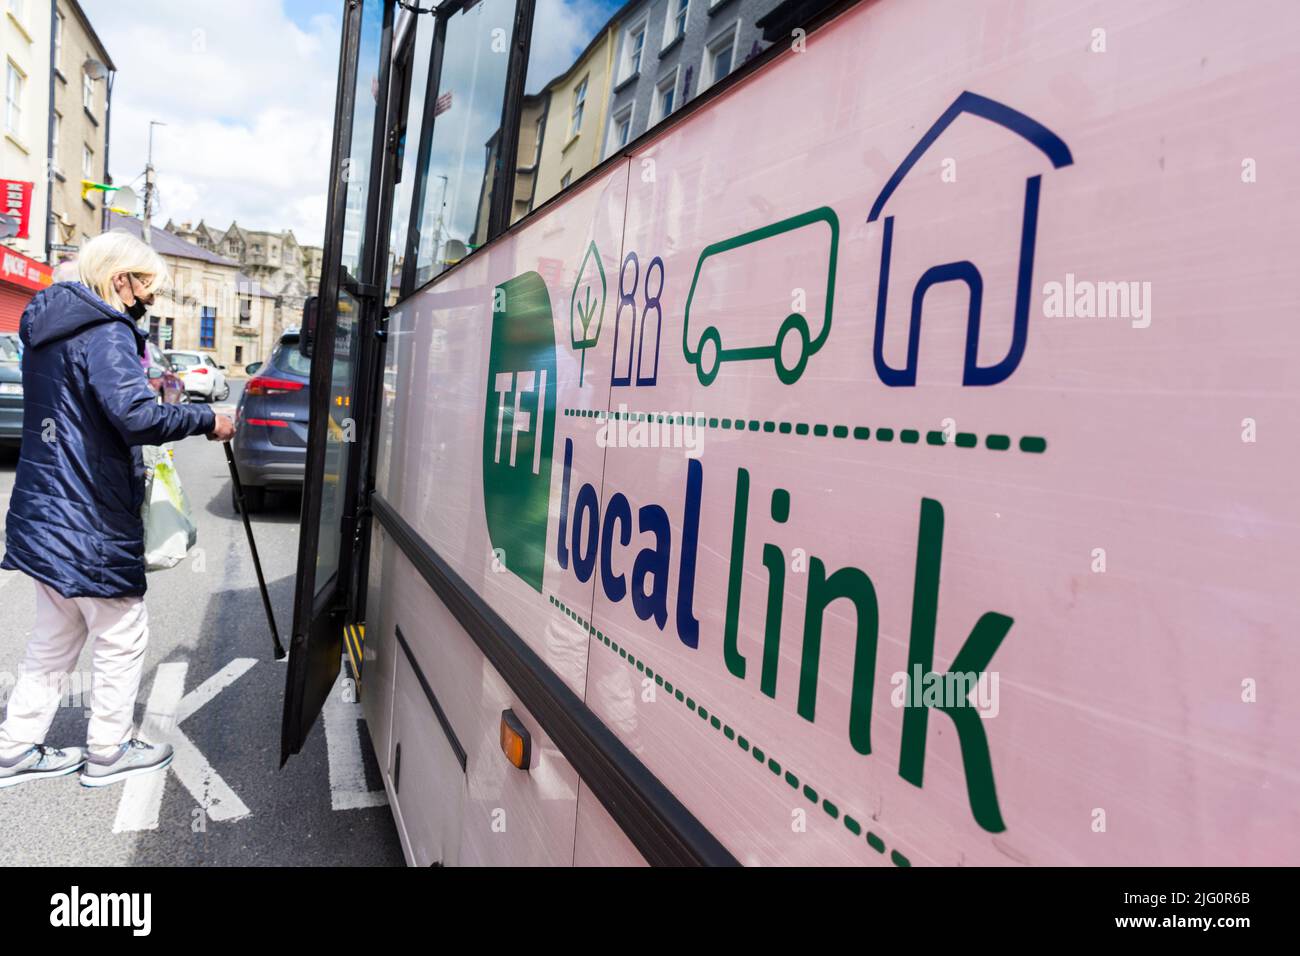 Rural Transport Programme/TFI Local Link bus in Donegal Town, County Donegal, Ireland. Passengers board the bus. Stock Photo